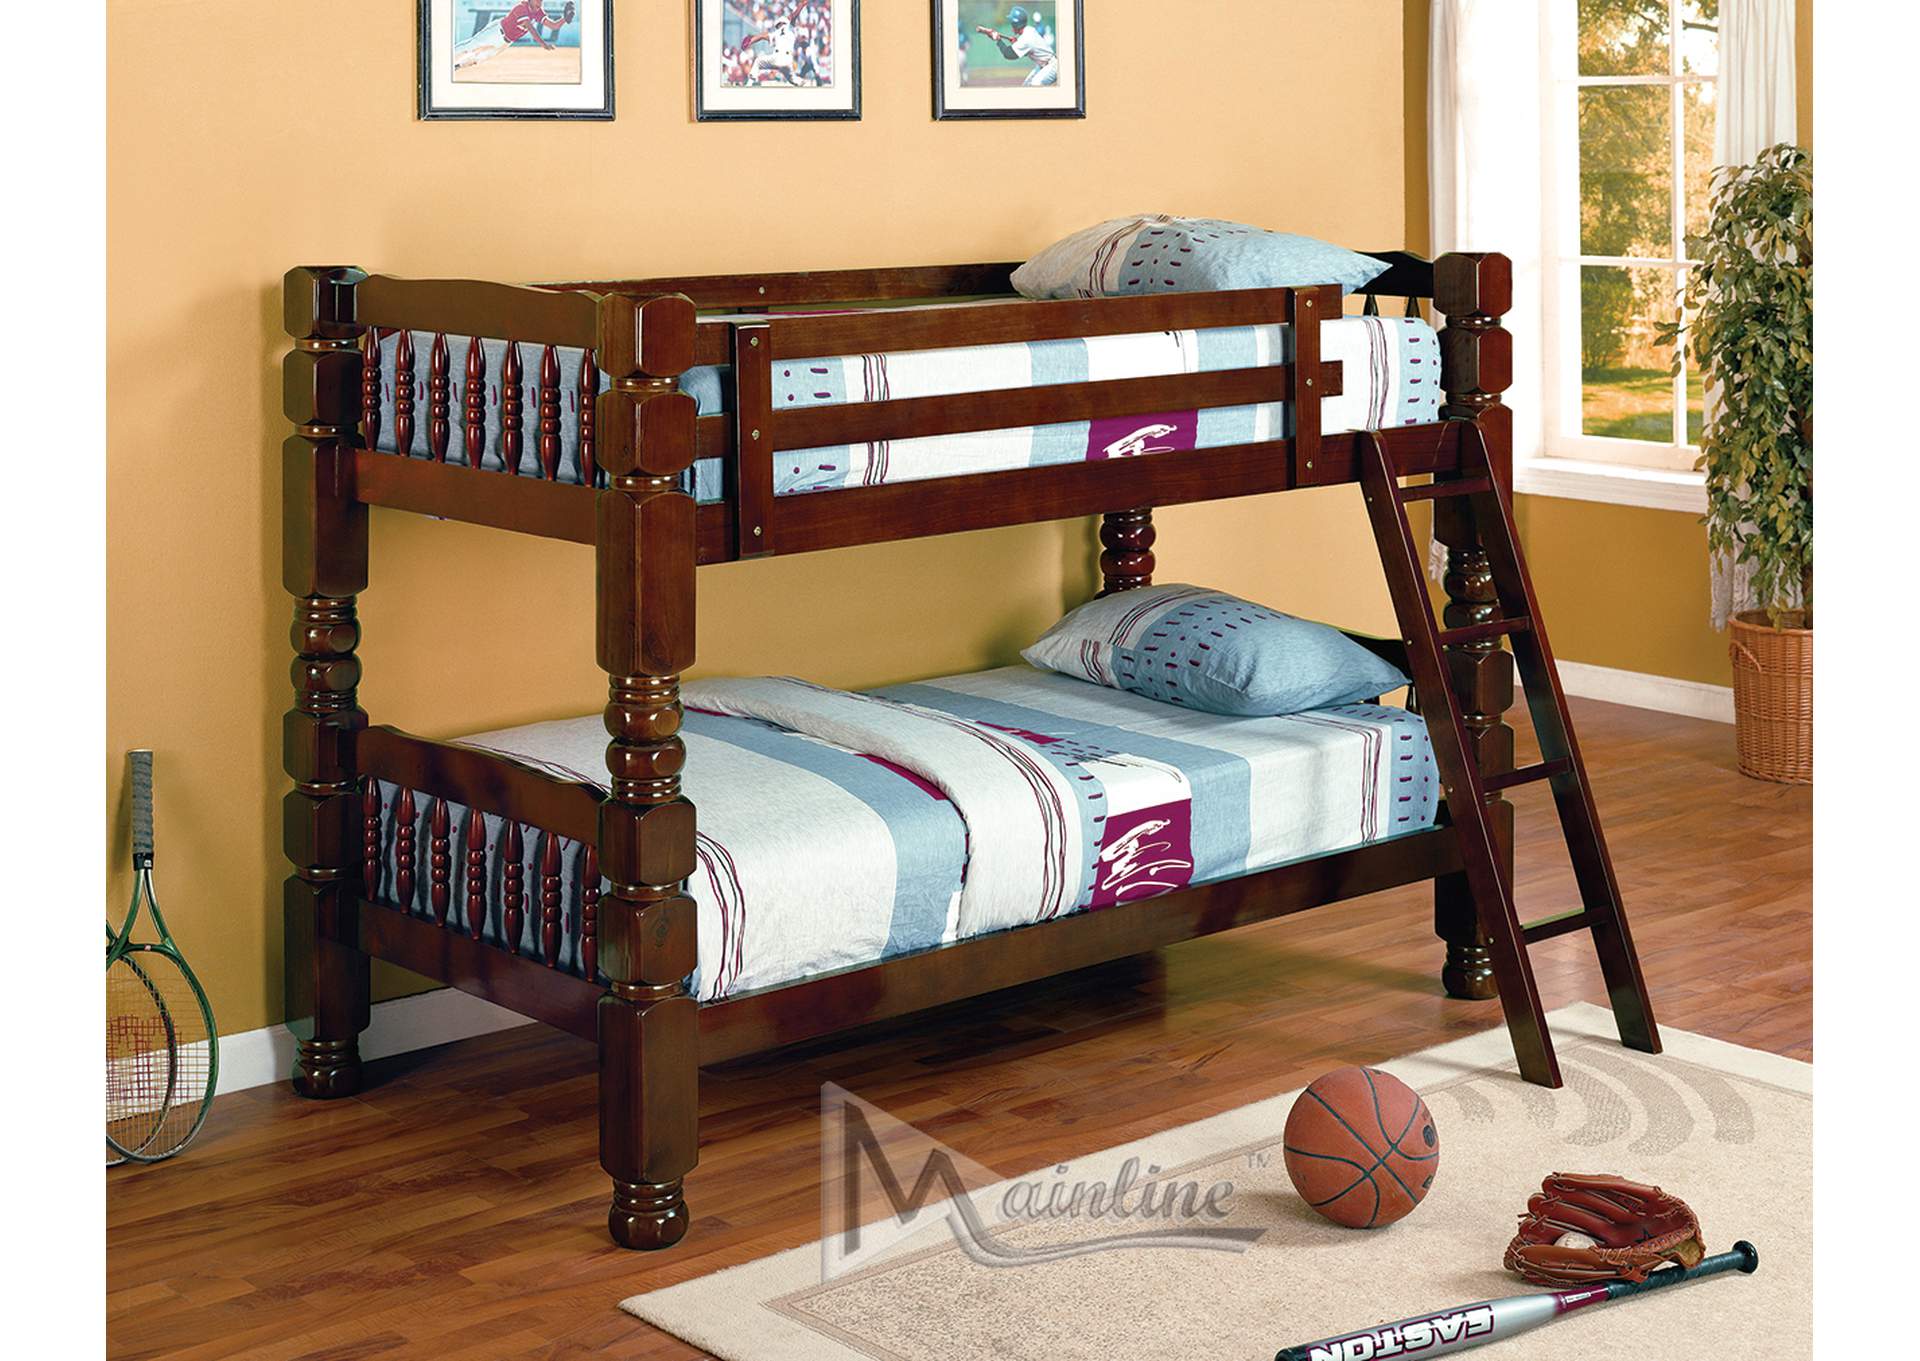 Cherry T/T Xl Spindle Bunk Bed,Mainline